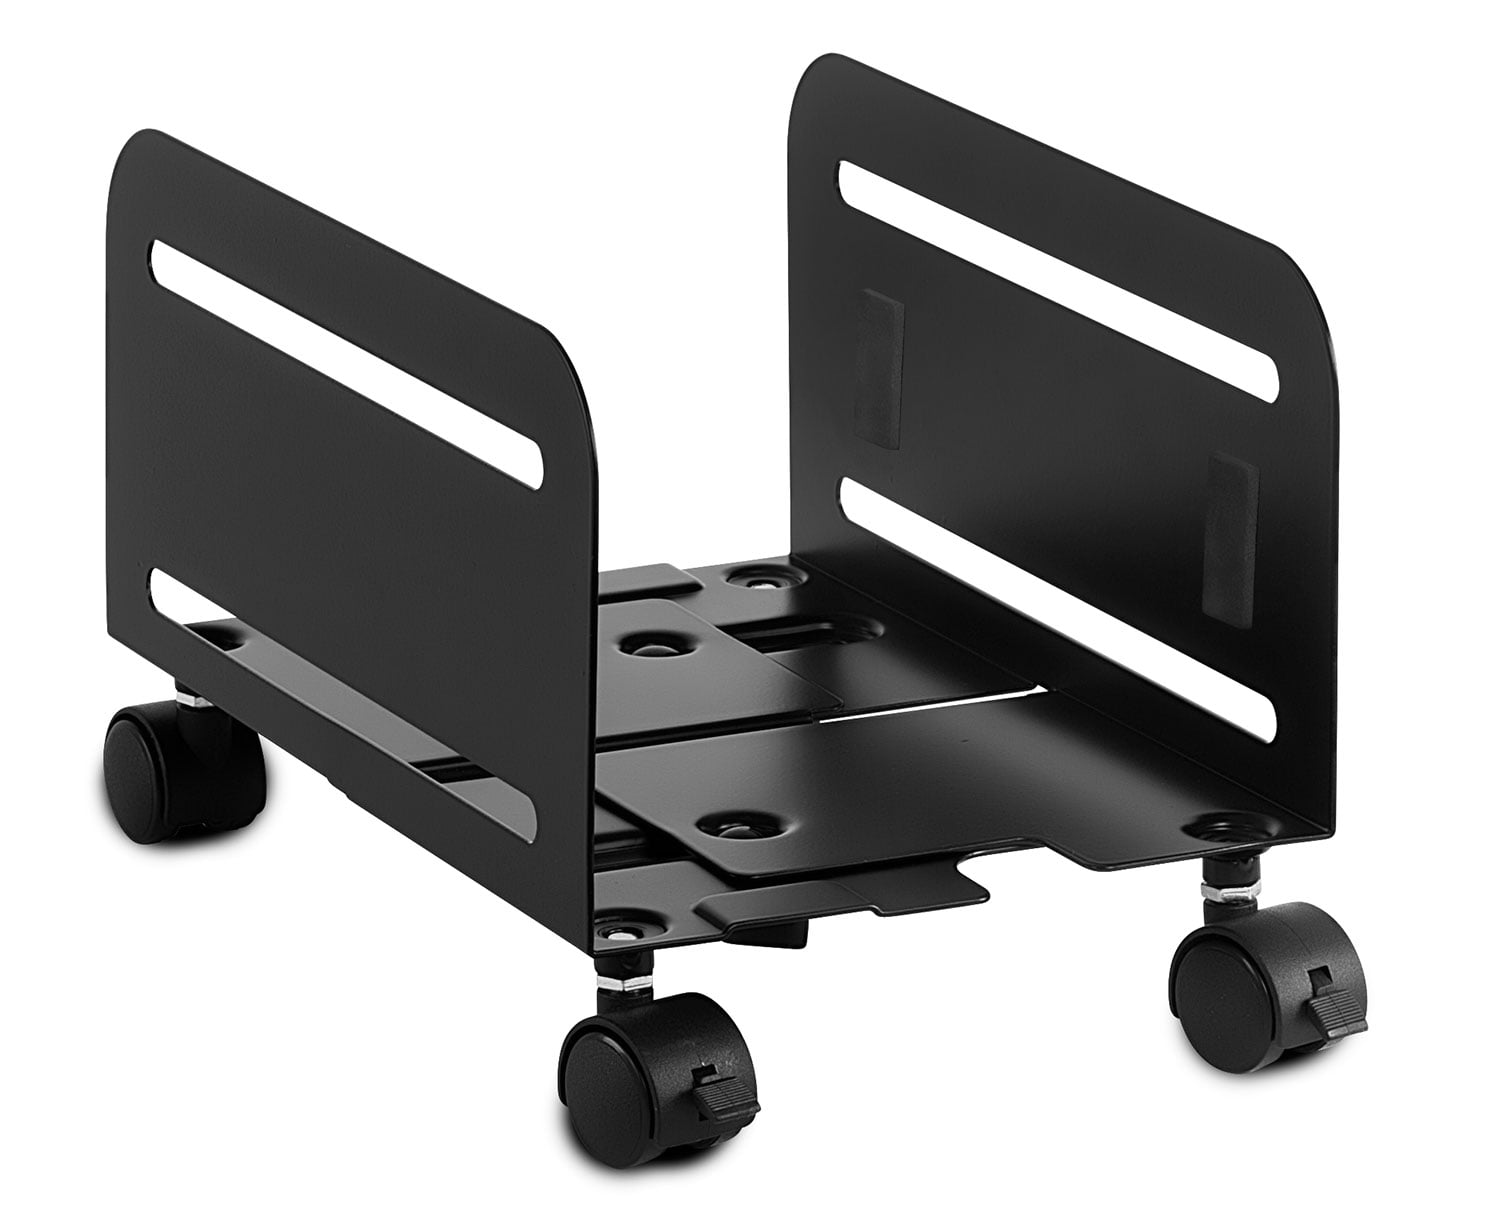 Adjustable Width Mobile Tower Stand Computer Tower Stand with 4 Rolling Caster Wheels Plastic） Premium Gaming Computer Holder Suitable for Different Floor PC Case（Stainless Steel